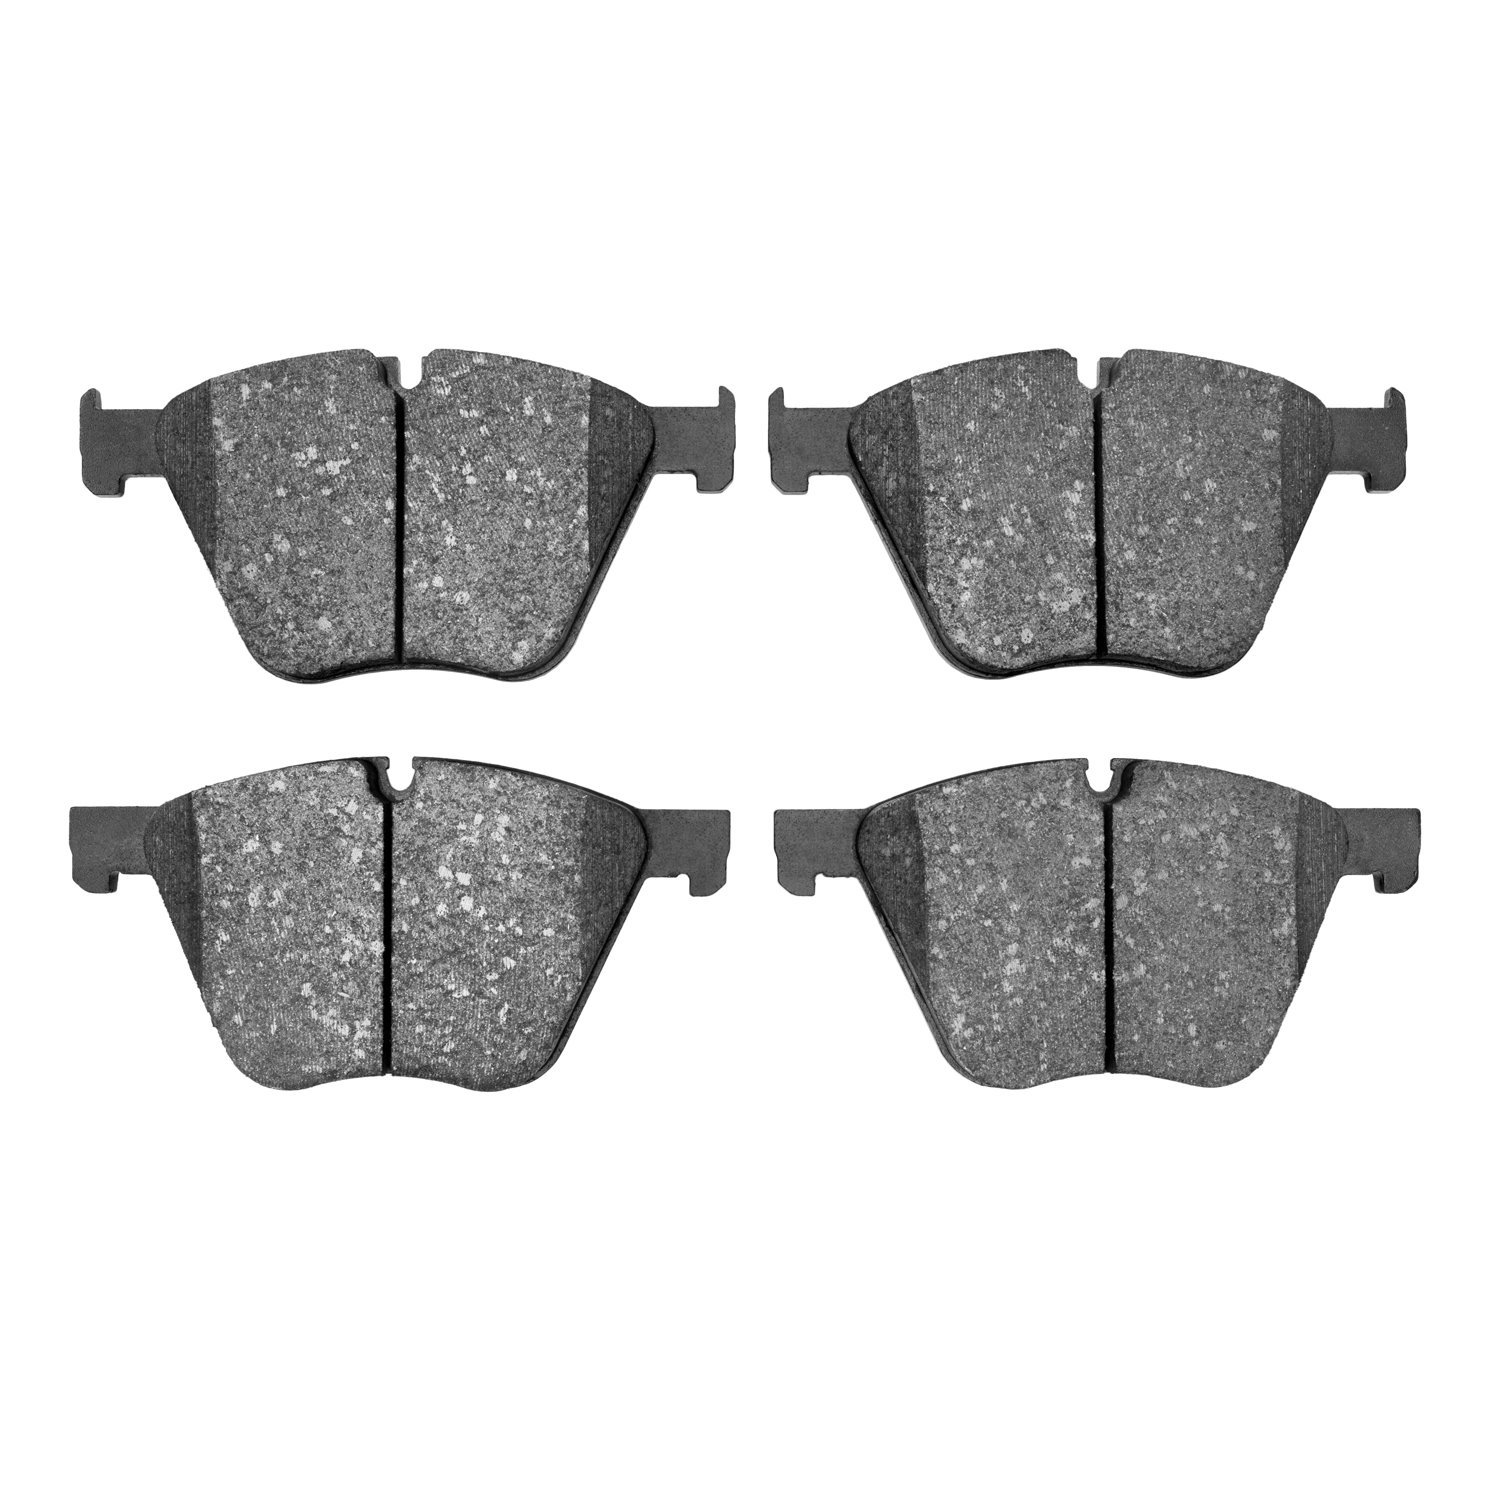 1551-1443-00 5000 Advanced Low-Metallic Brake Pads, 2010-2019 Multiple Makes/Models, Position: Front